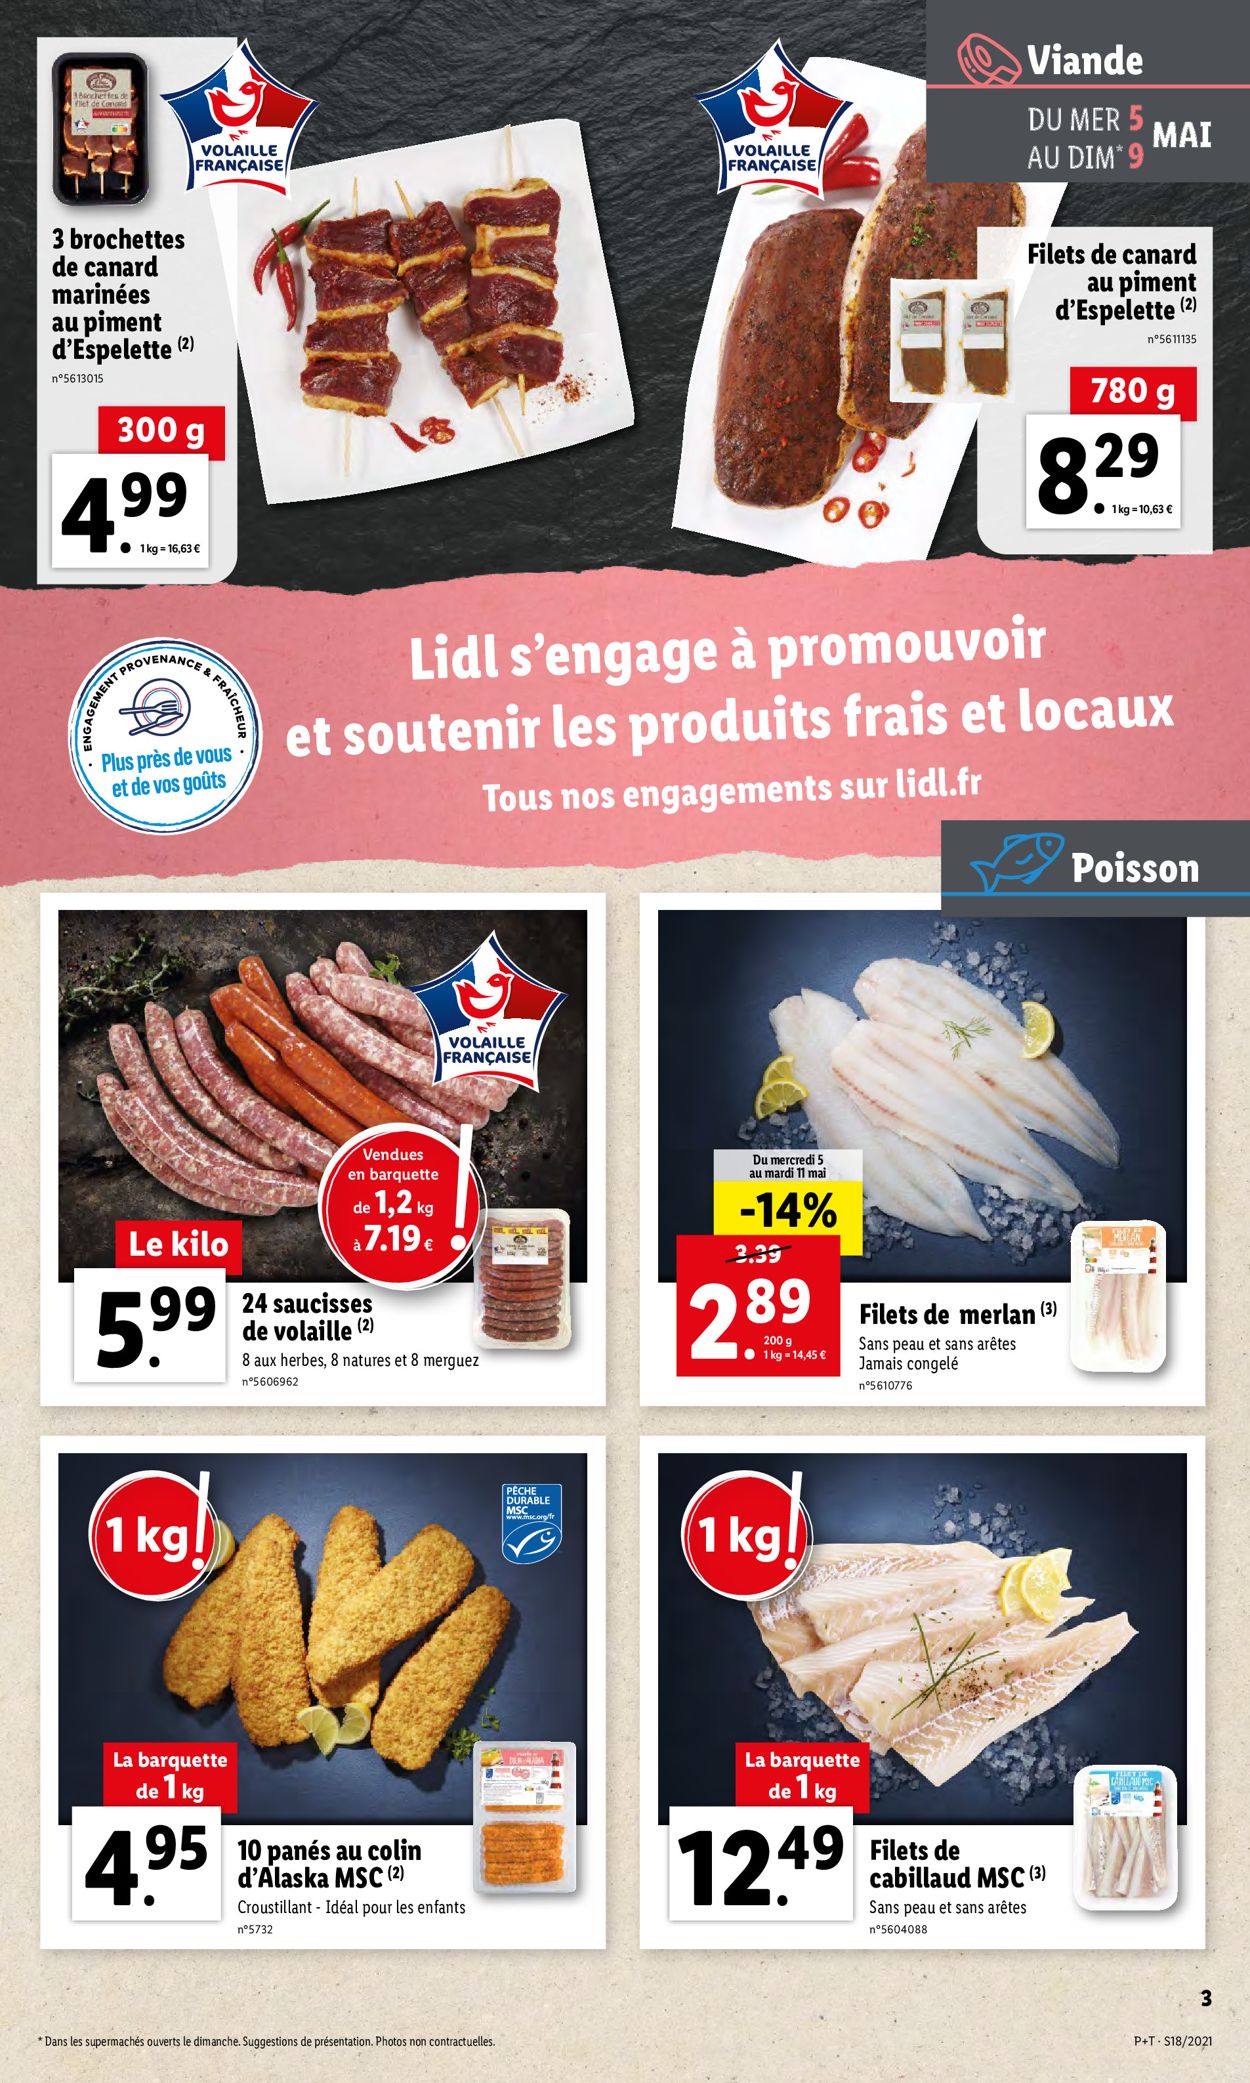 Lidl Catalogue - 05.05-11.05.2021 (Page 3)